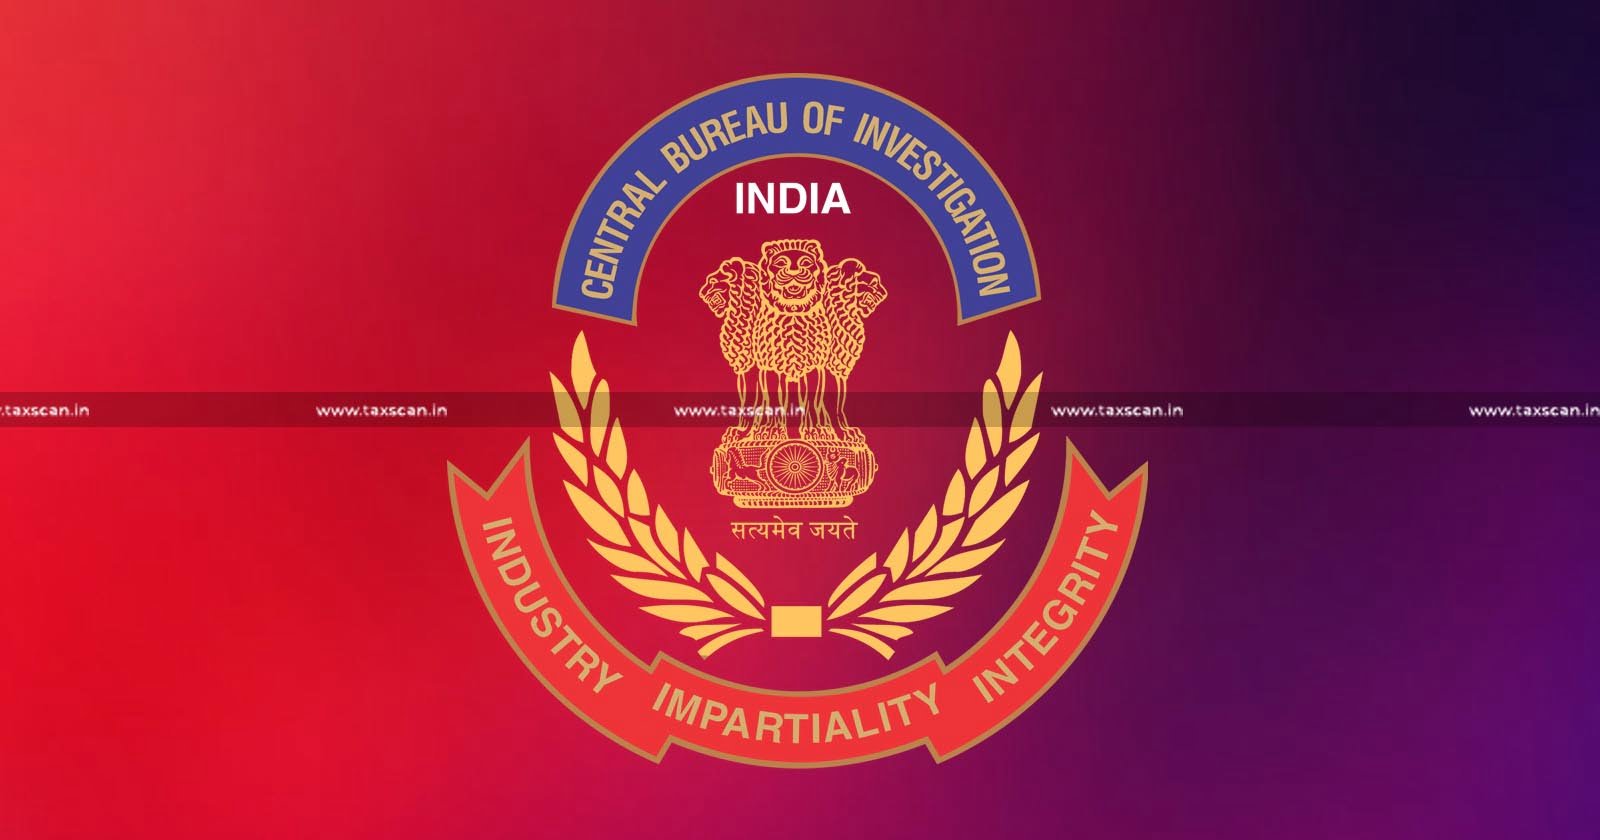 CBI - Disproportionate Assets - Excise - Excise and customs - customs - Deputy Commissioner - fine - imprisonment - Former Excise & Customs Deputy Commissioner to Pay 2.5 Cr Fine - taxscan